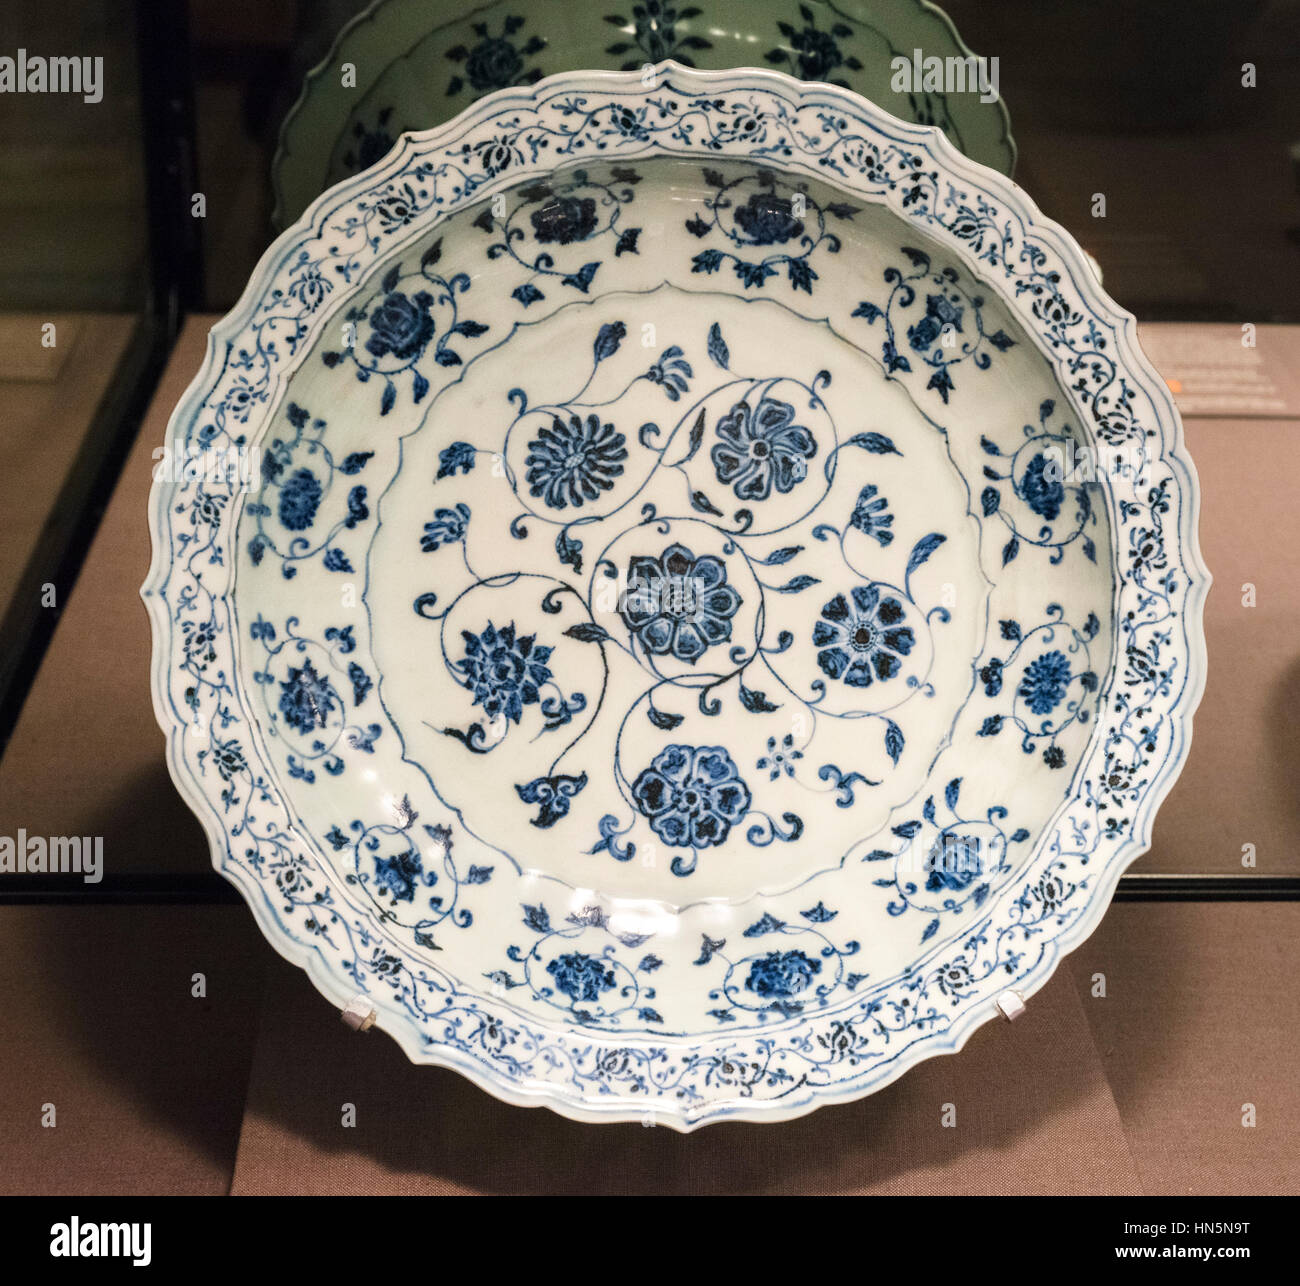 Ming Dynasty porcelain dish, early 15th century. Stock Photo